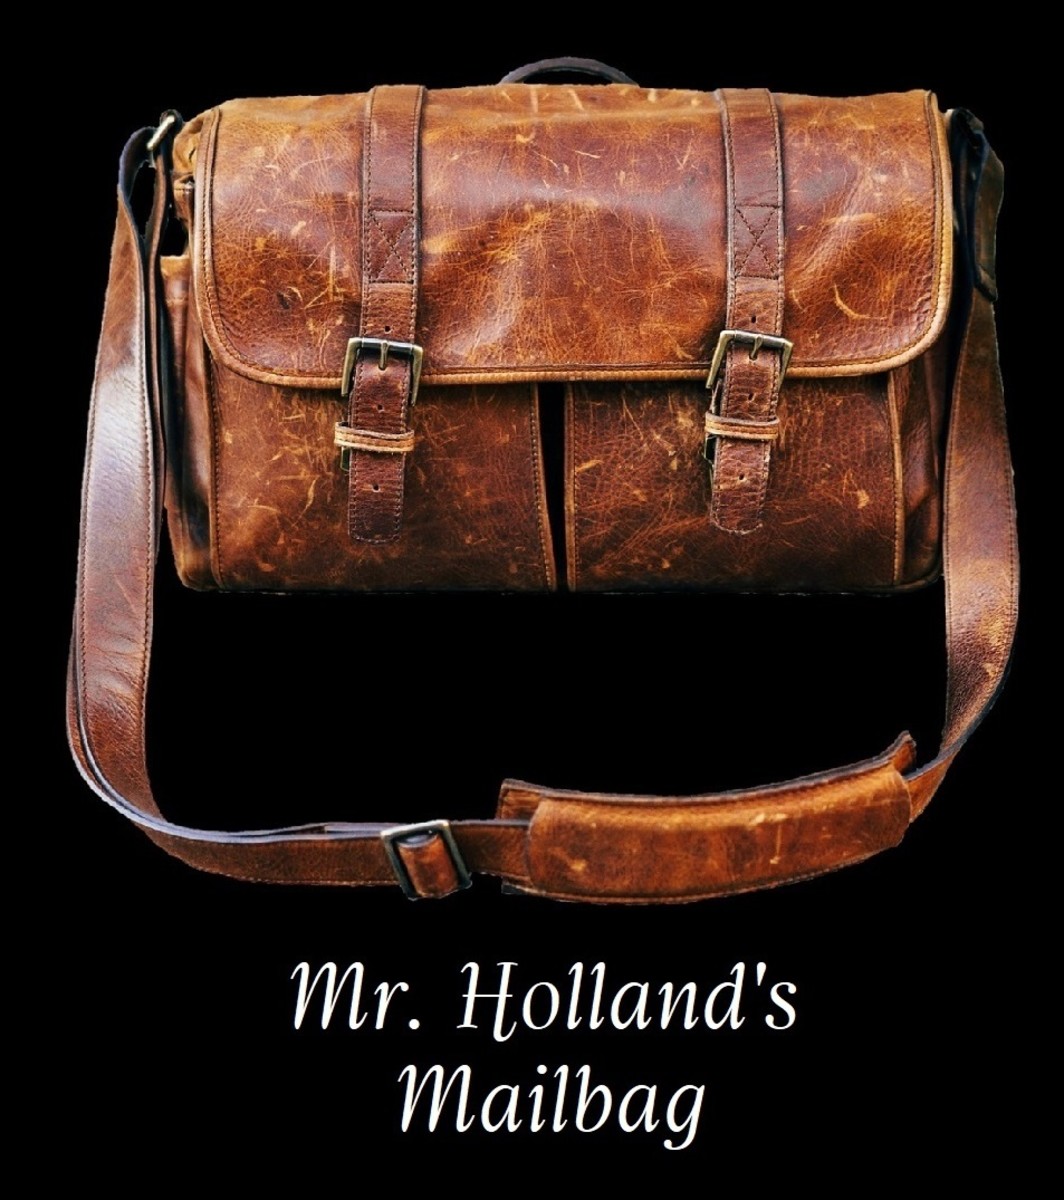 Cover of "Mr. Holland's Mailbag"